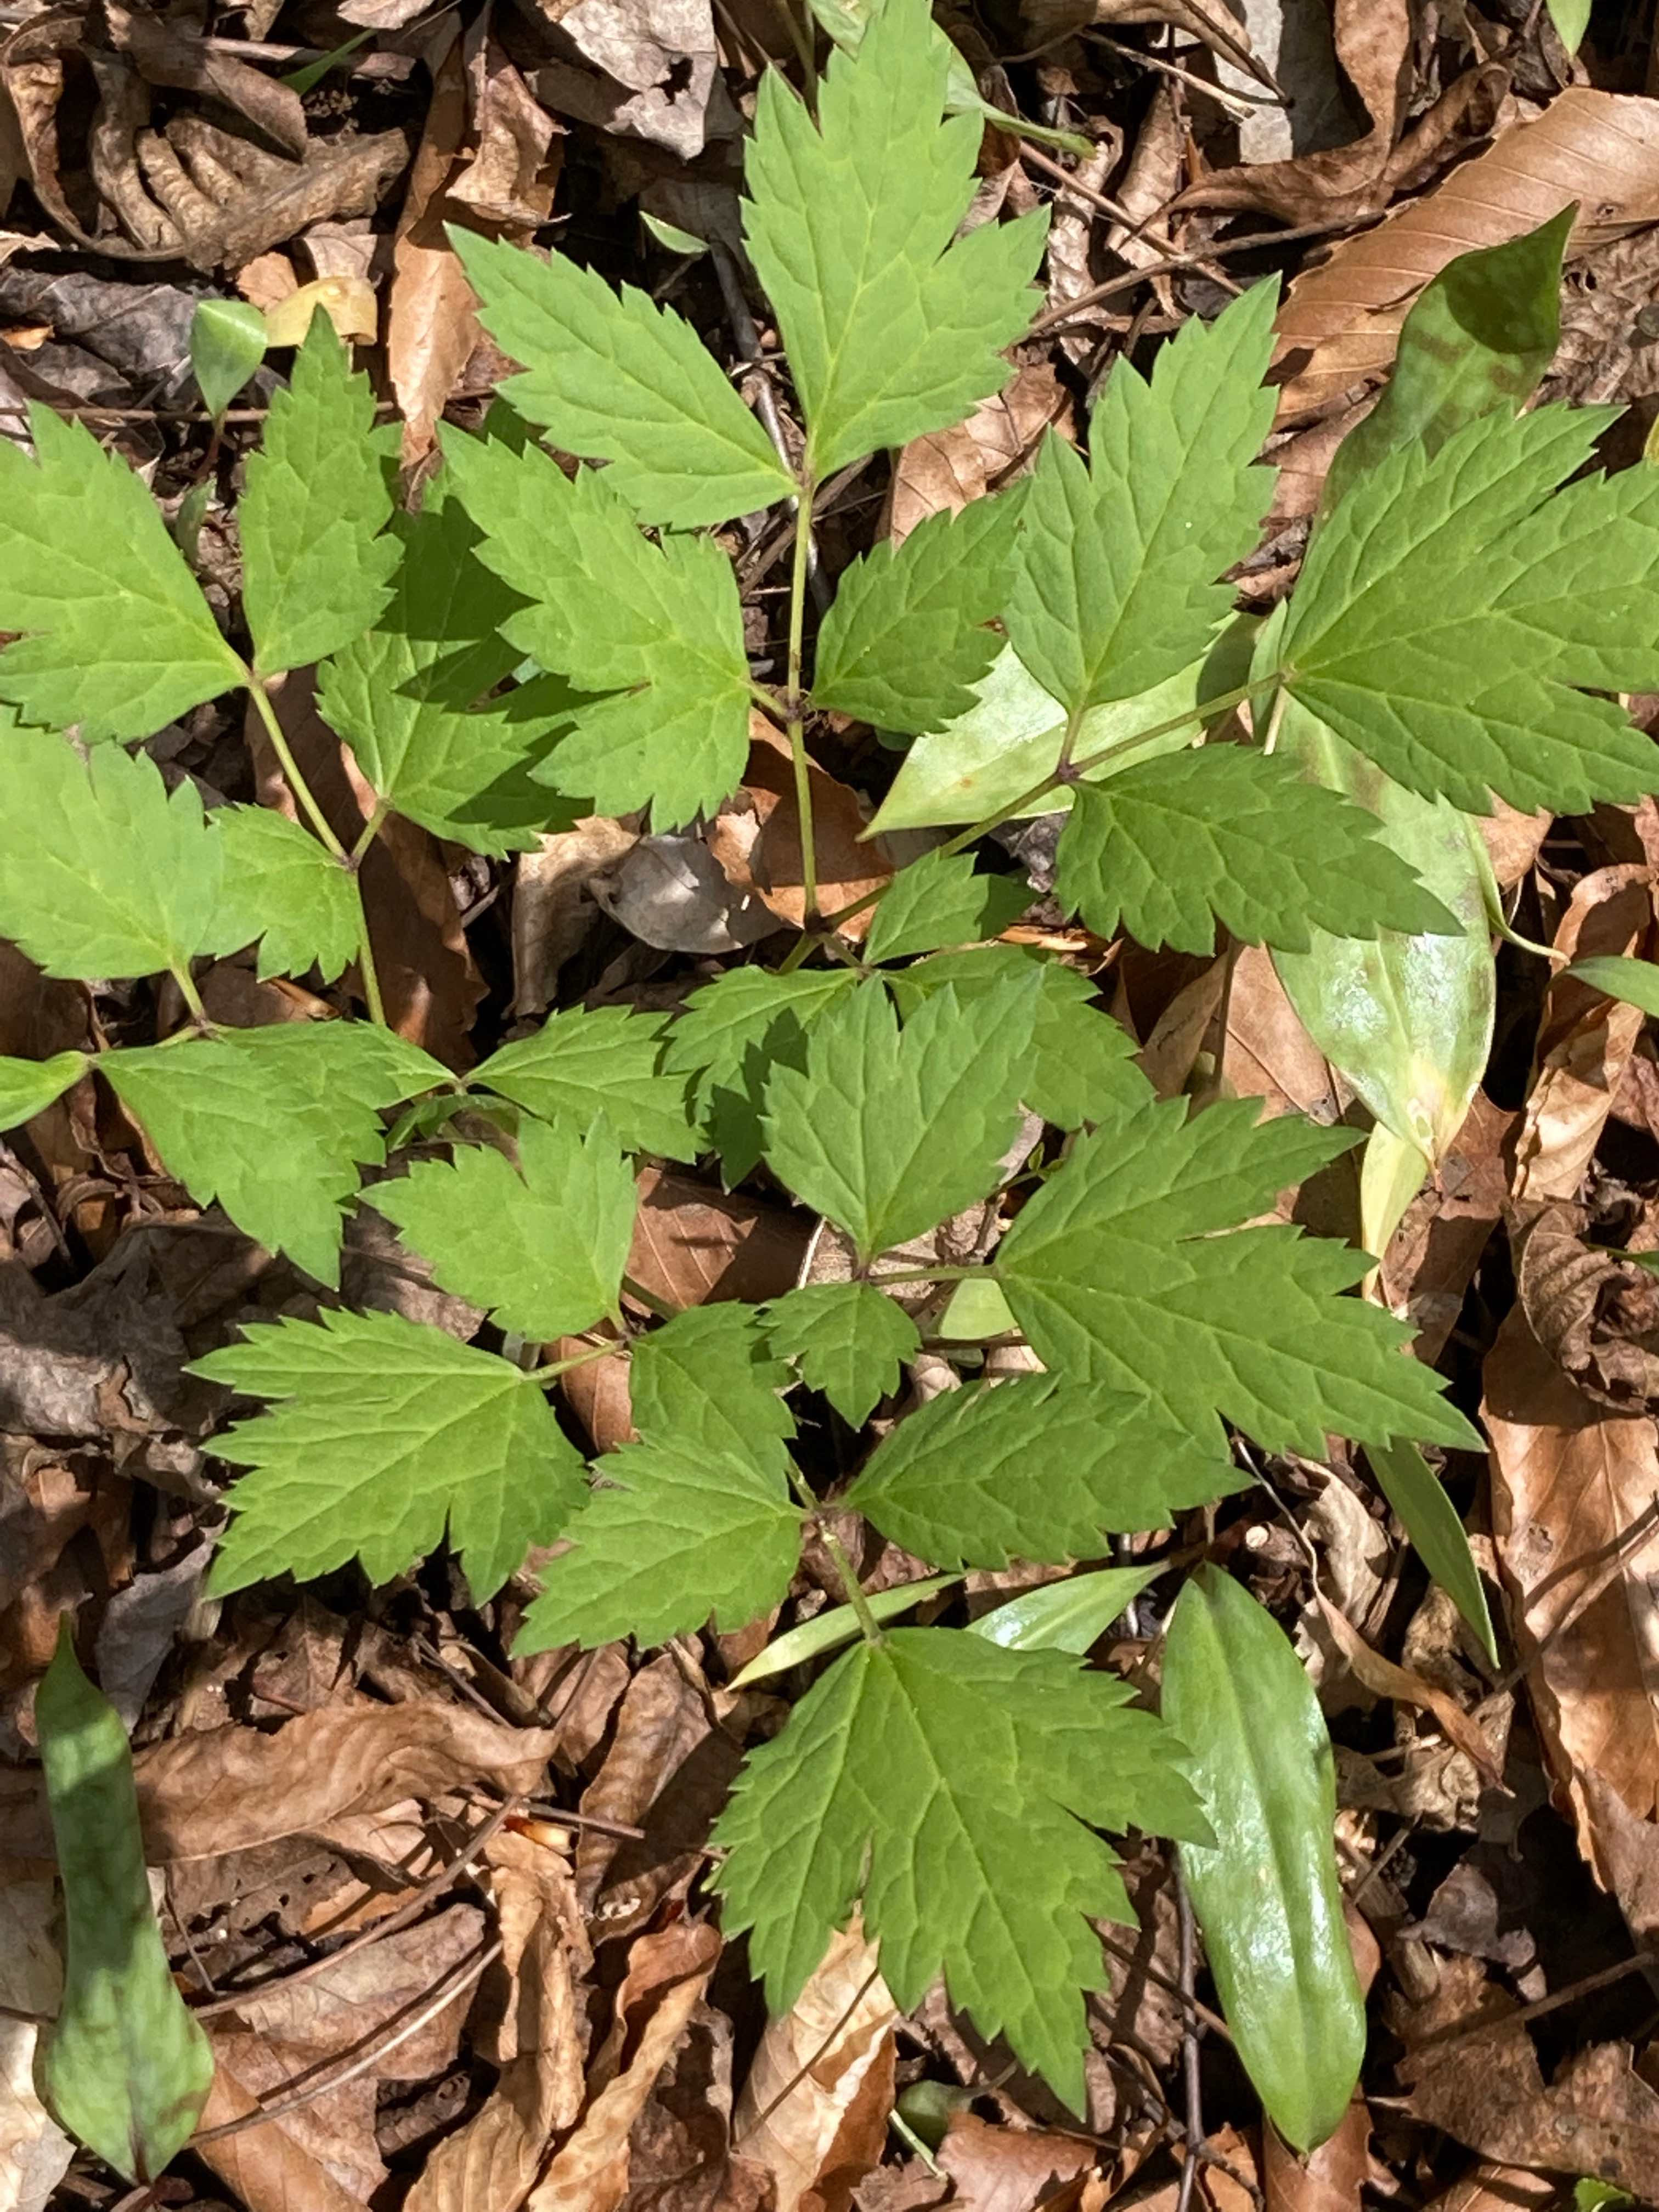 The Scientific Name is Actaea racemosa [= Cimicifuga racemosa]. You will likely hear them called Common Black Cohosh, Early Black Cohosh. This picture shows the Large compound leaves, 2- to 3-times divided. Leaflets are very serrated. of Actaea racemosa [= Cimicifuga racemosa]